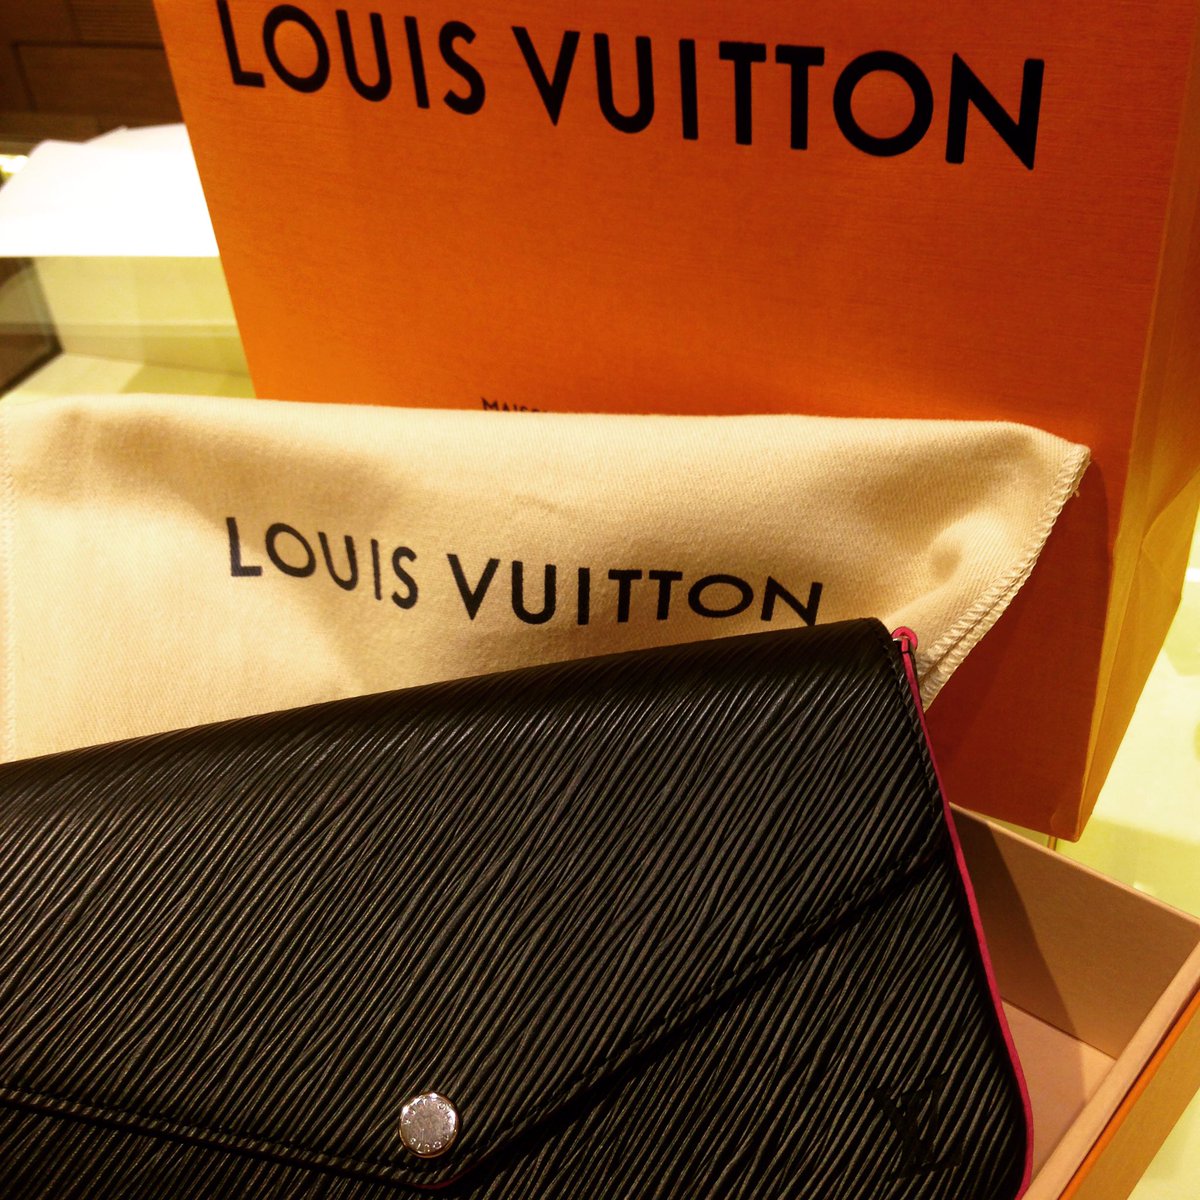 How do you say 'Thank You' in French? '#LouisVuitton' Picking up a little something for someone special. #LVpurse #LVhandbags @LouisVuitton